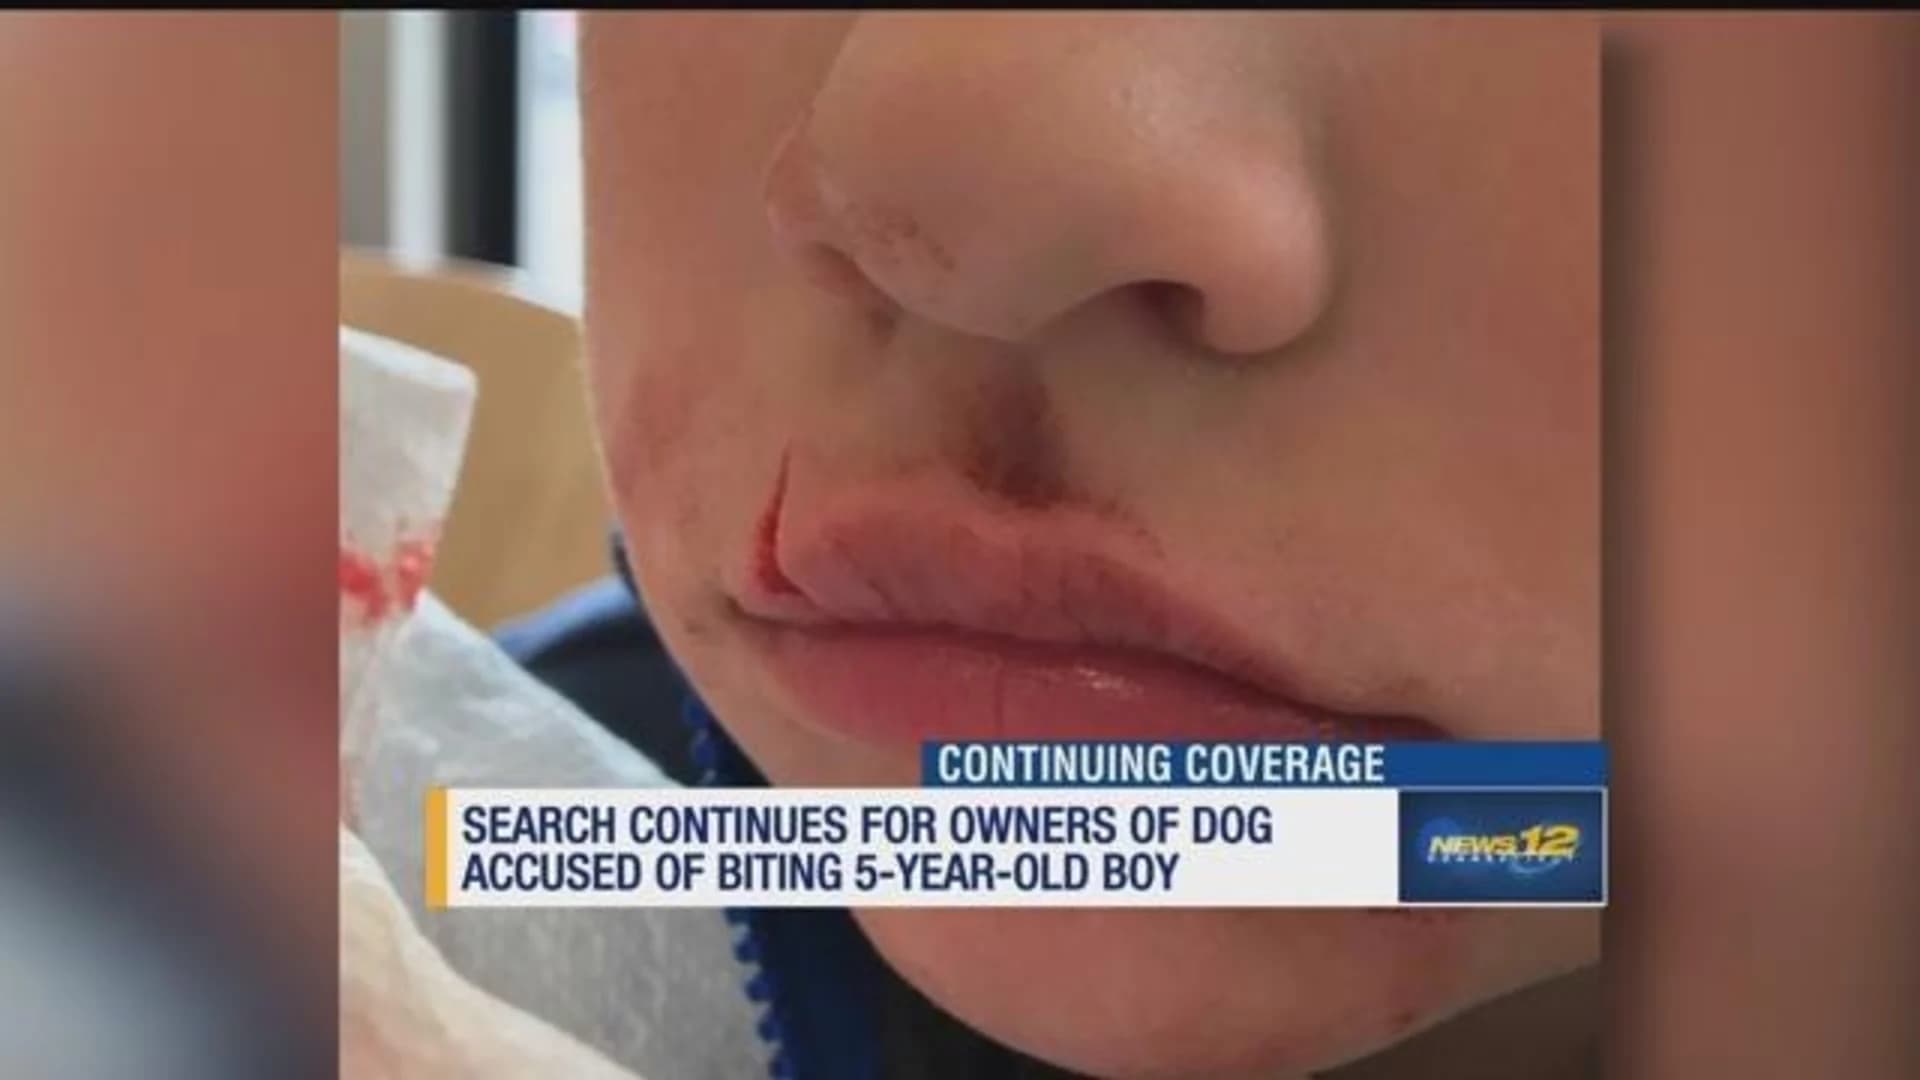 Father pleads for owners of dog accused of biting son to come forward